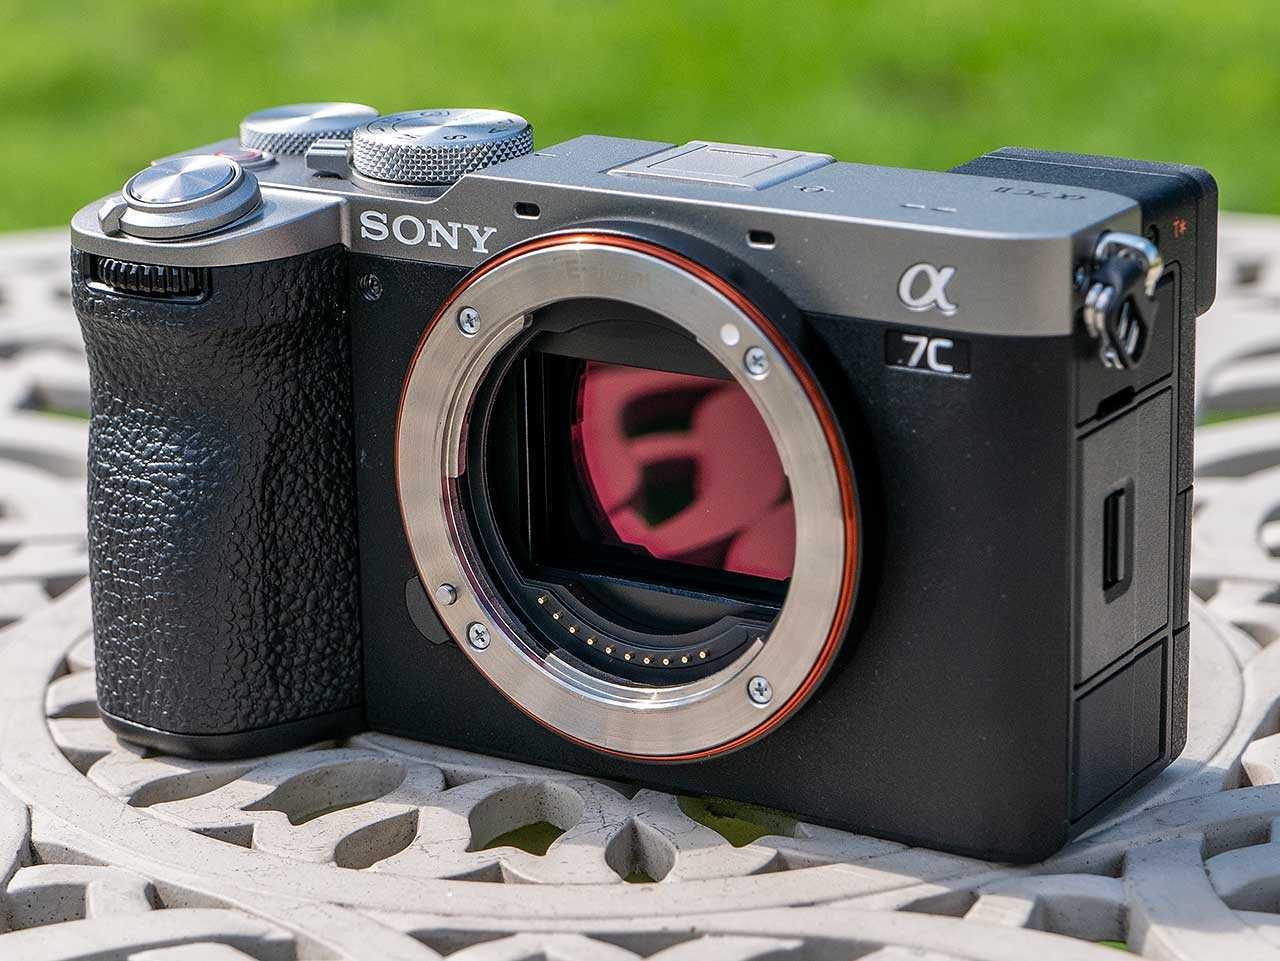 Sony A7C review so far